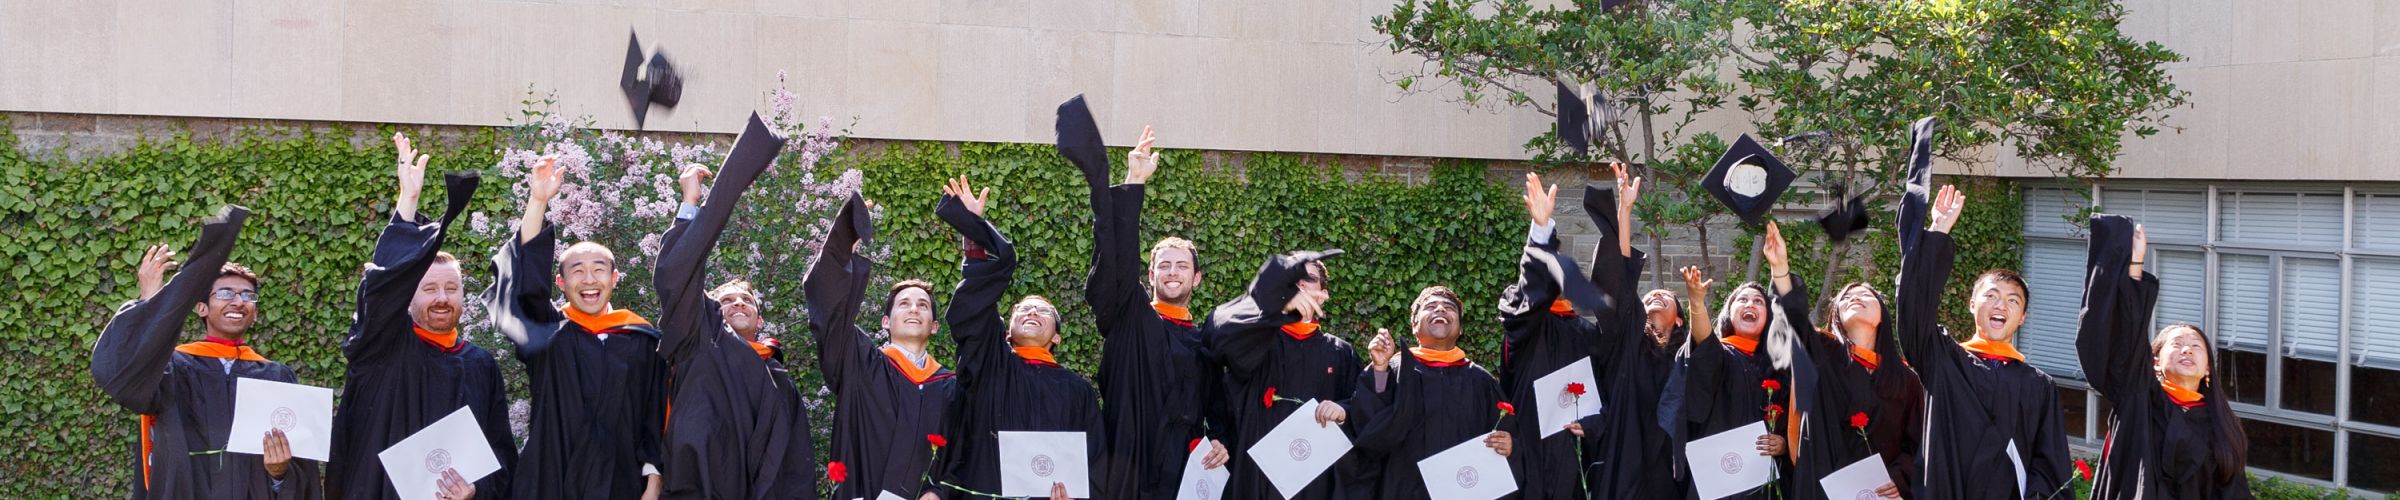 masters students throwing graduation caps in the air